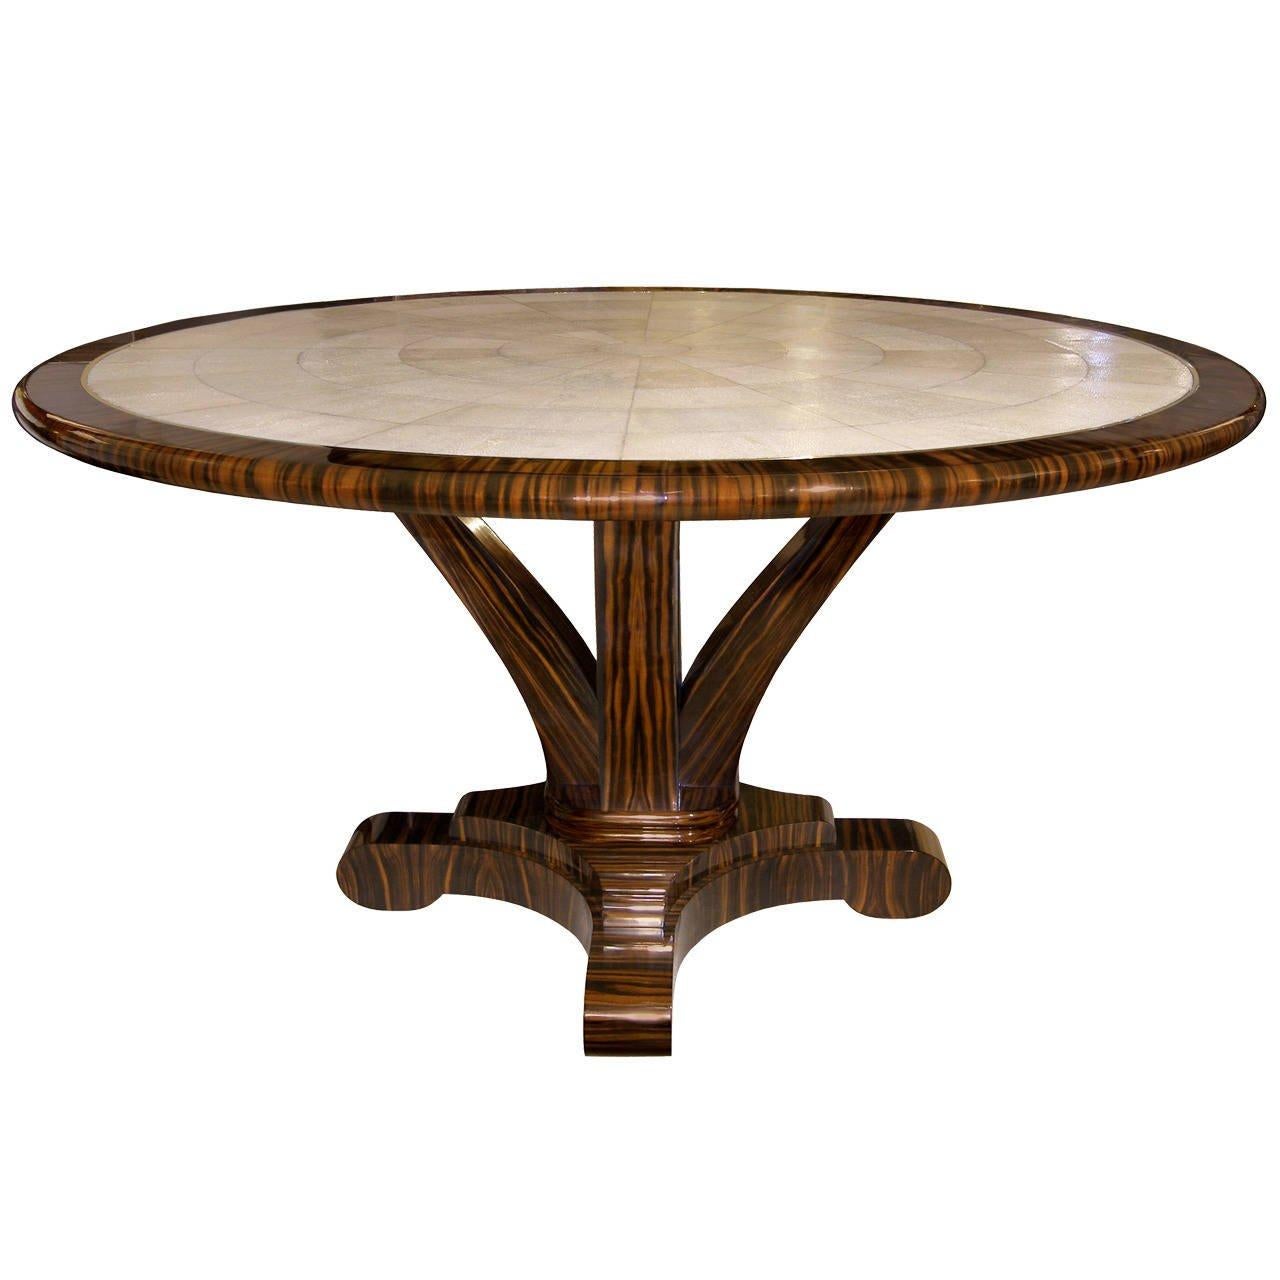 Delfine Macassar Ebony and Shagreen Table with Brass Detail In Excellent Condition For Sale In New York, NY